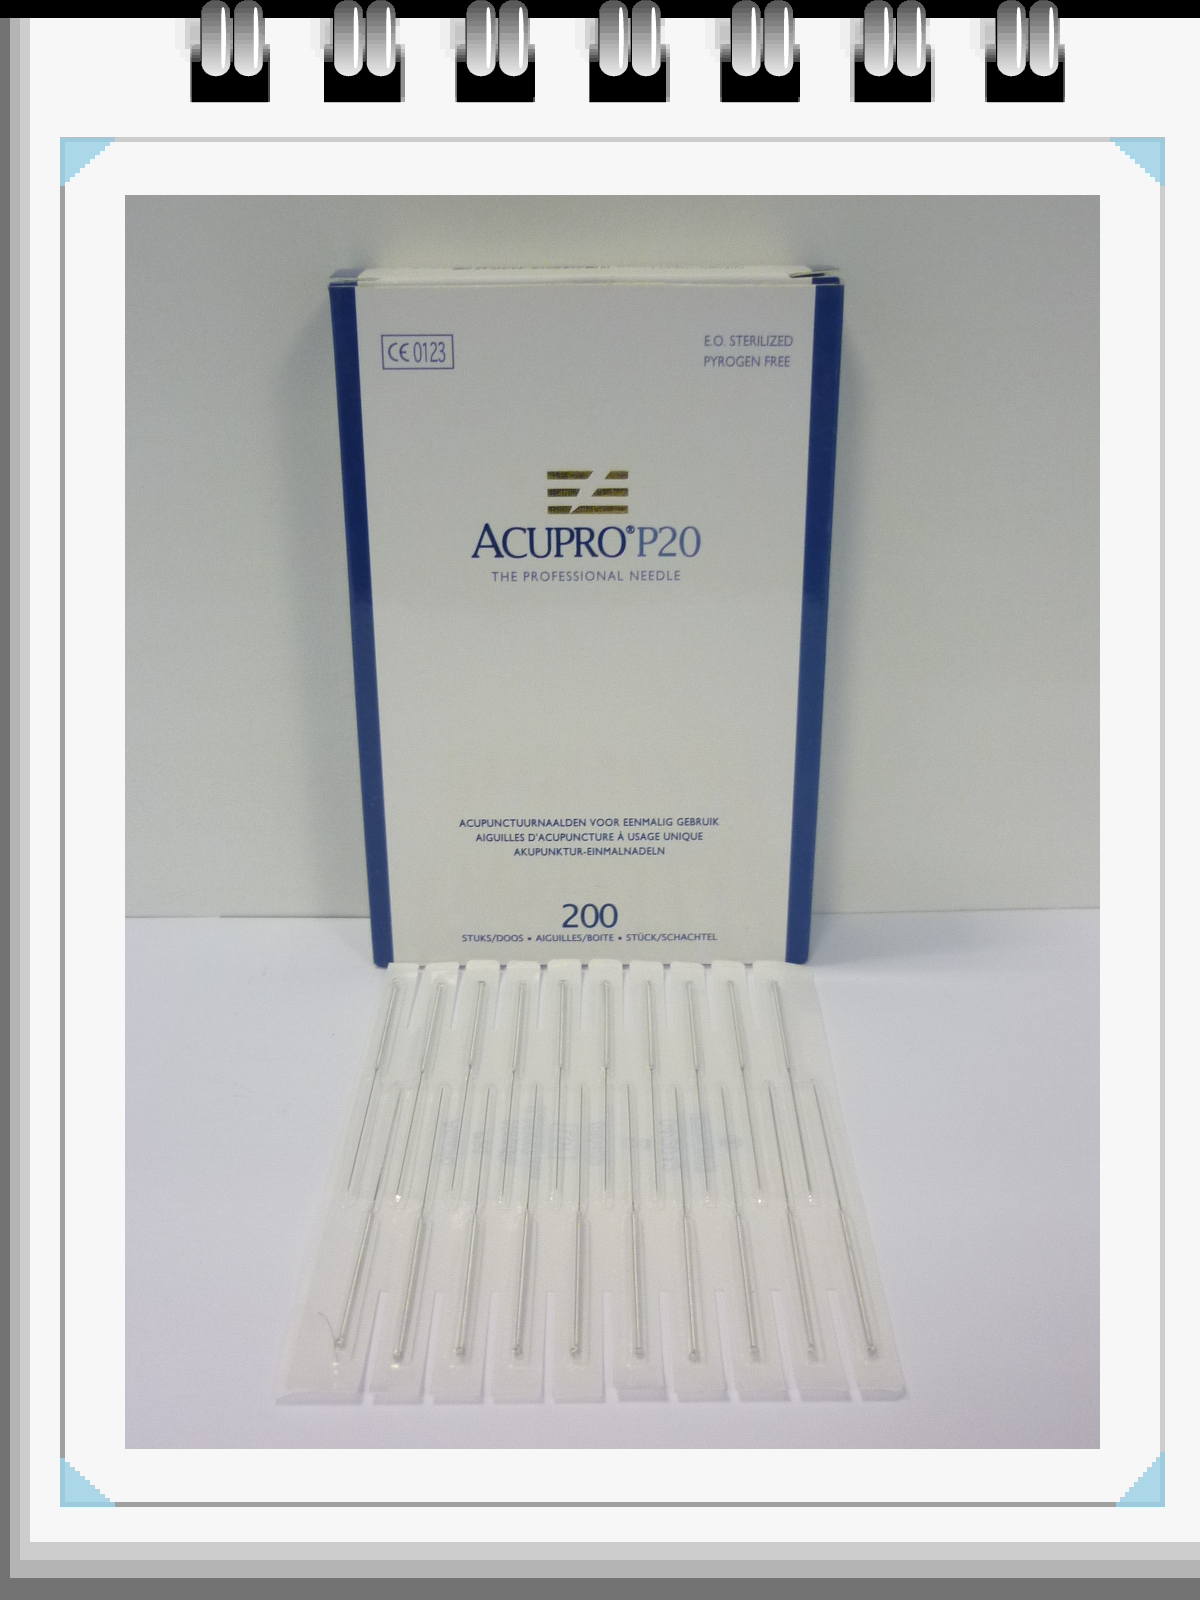 All Products - Acupuncture naalden 0,25 x 13mm - p--200